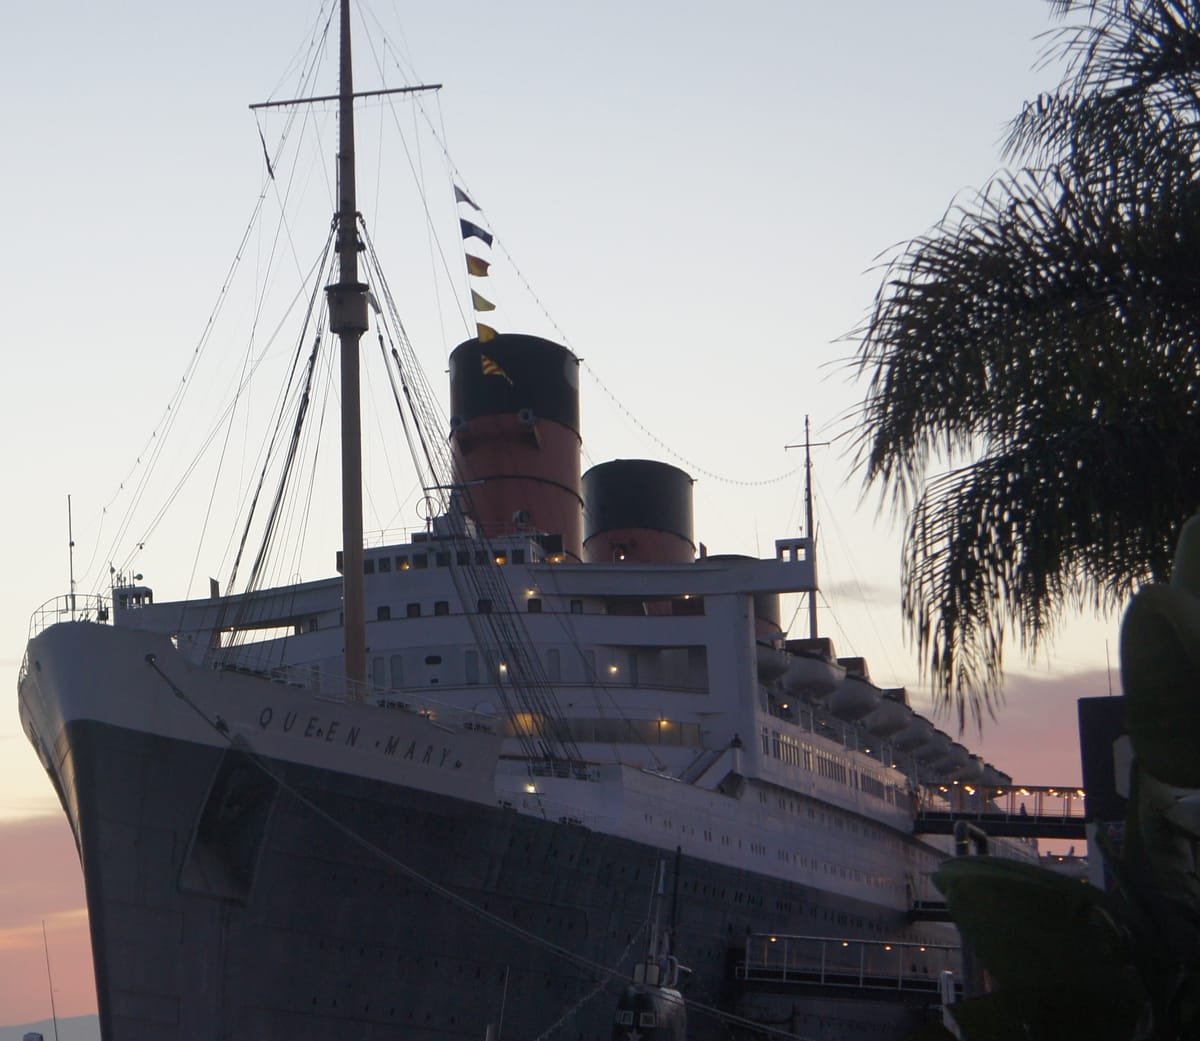 The RMS Queen Mary, reportedly haunted sits moored in long Beach, California